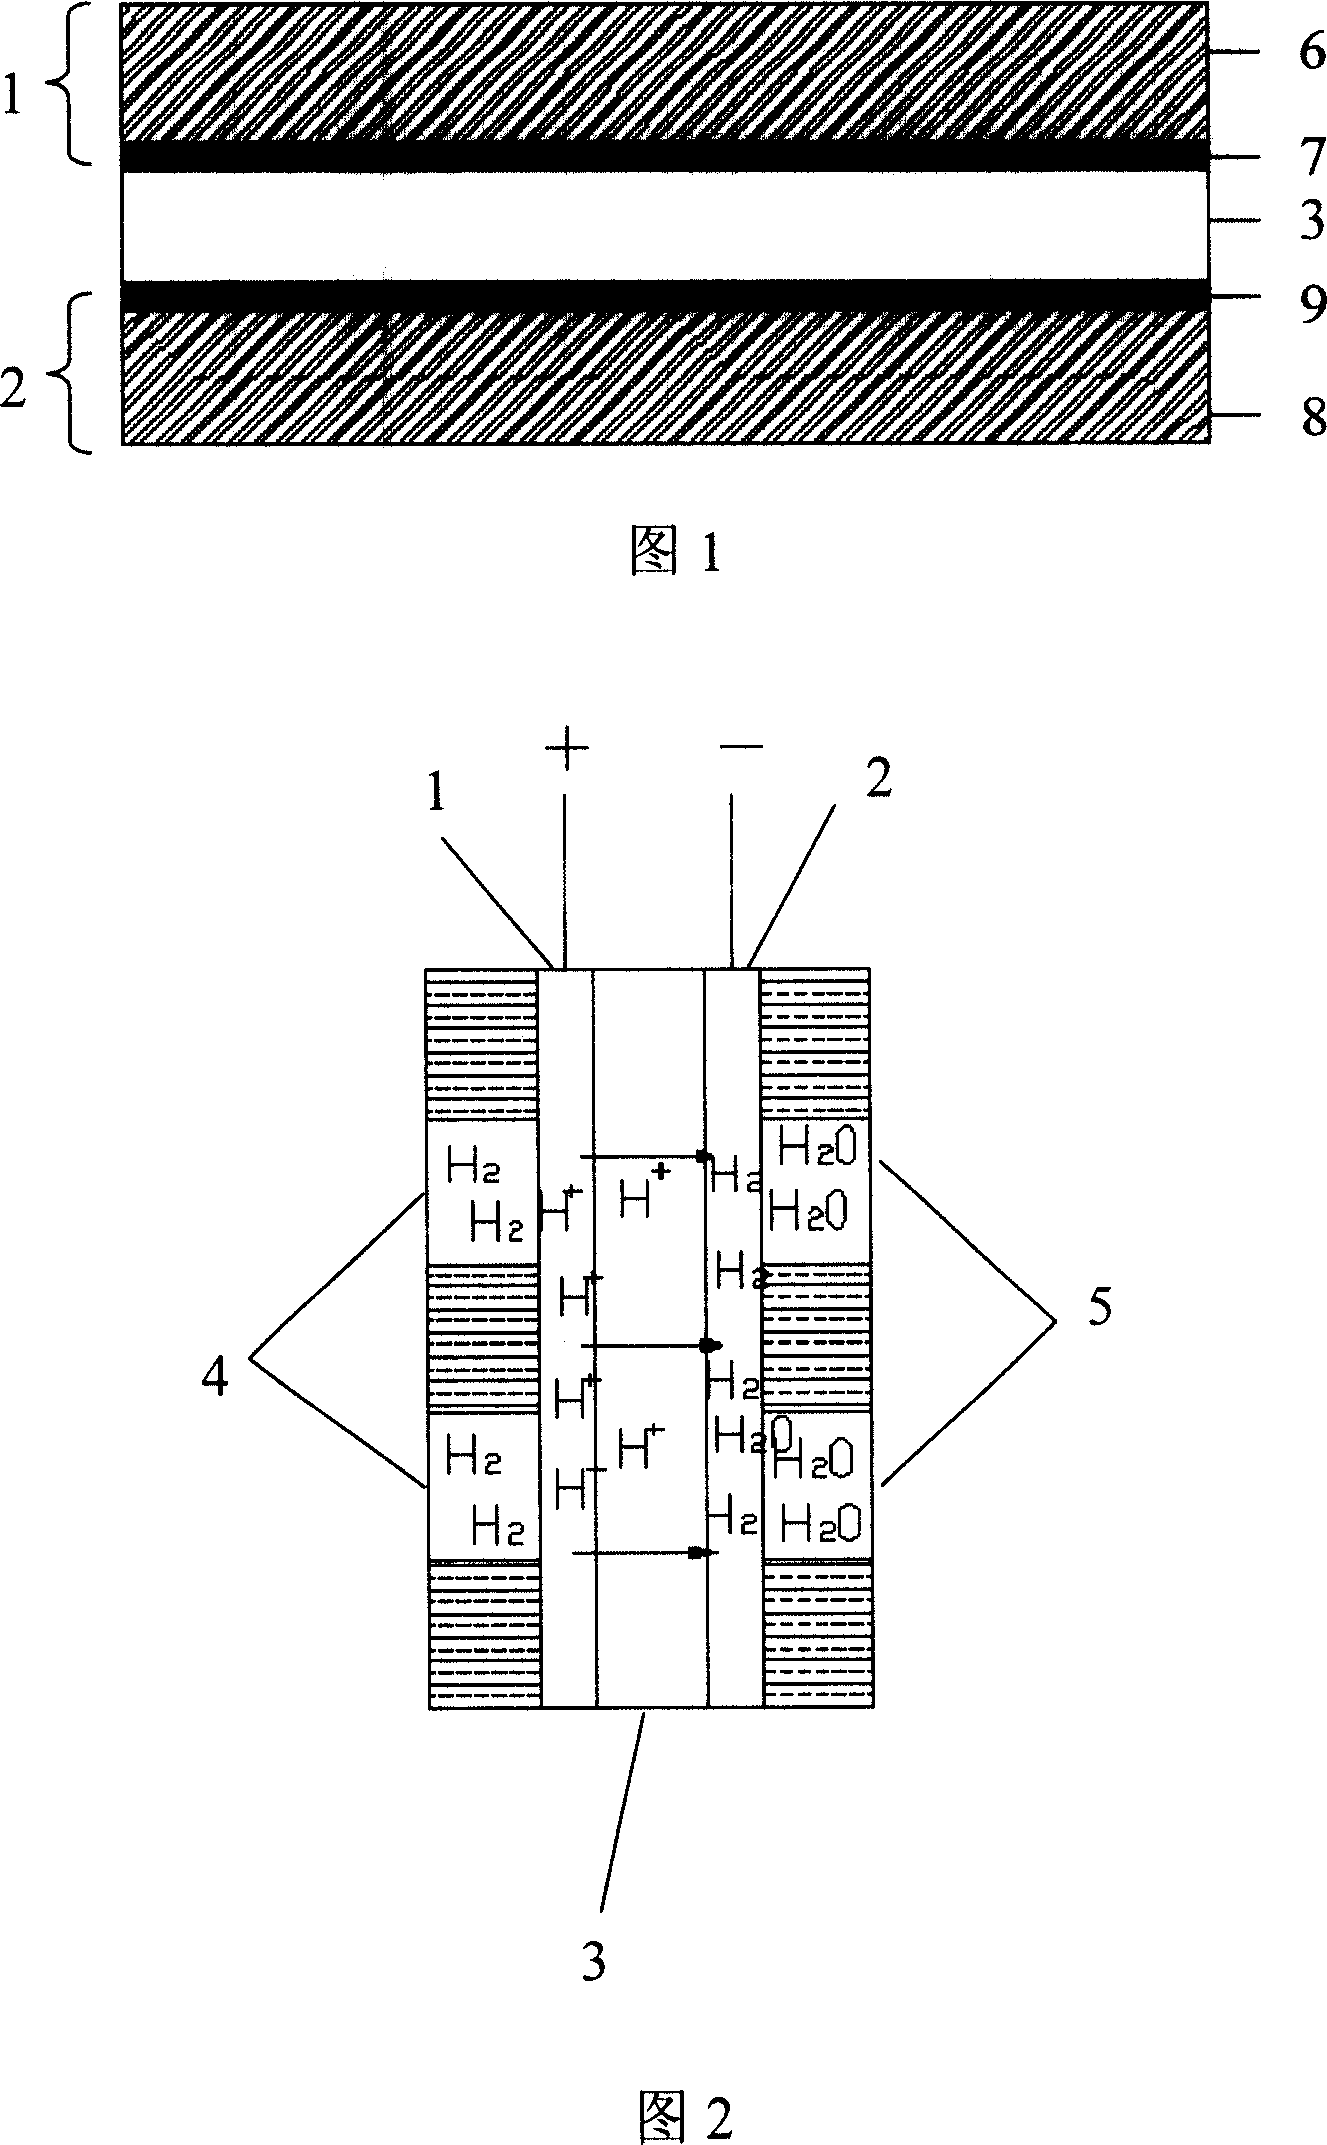 Method for activating membrane electrode of fuel cell